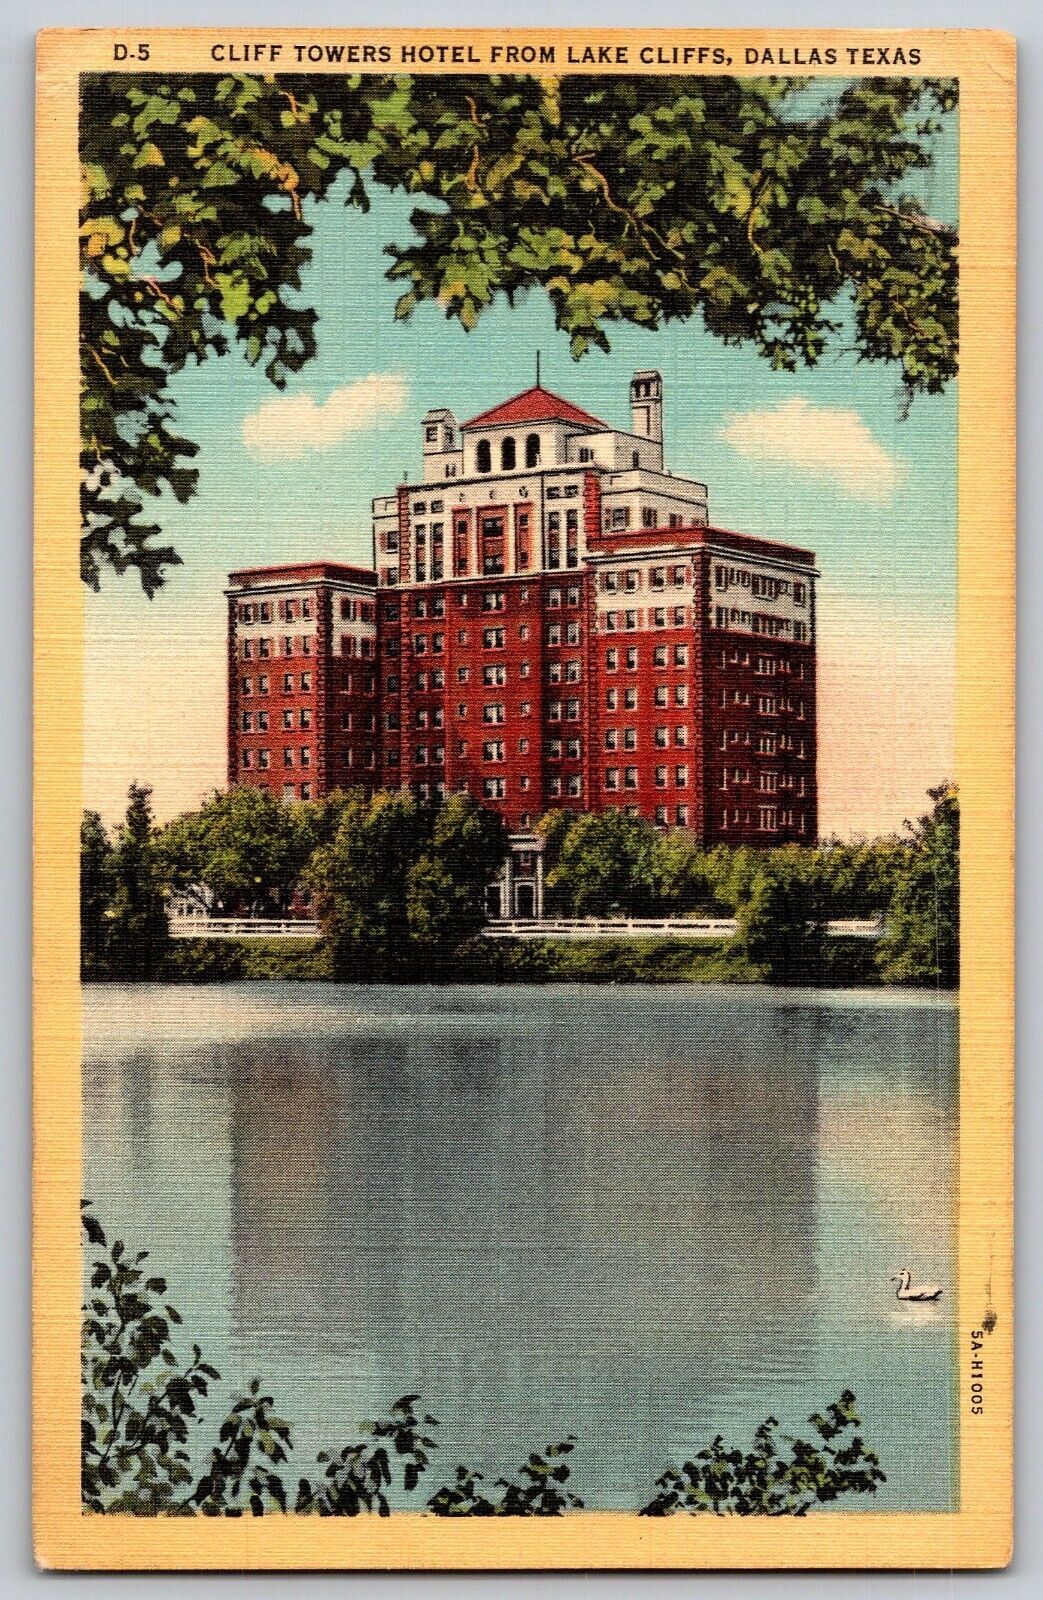 Dallas, Texas - Cliff Towers Hotel From Lake Cliffs - Vintage Postcard - Posted